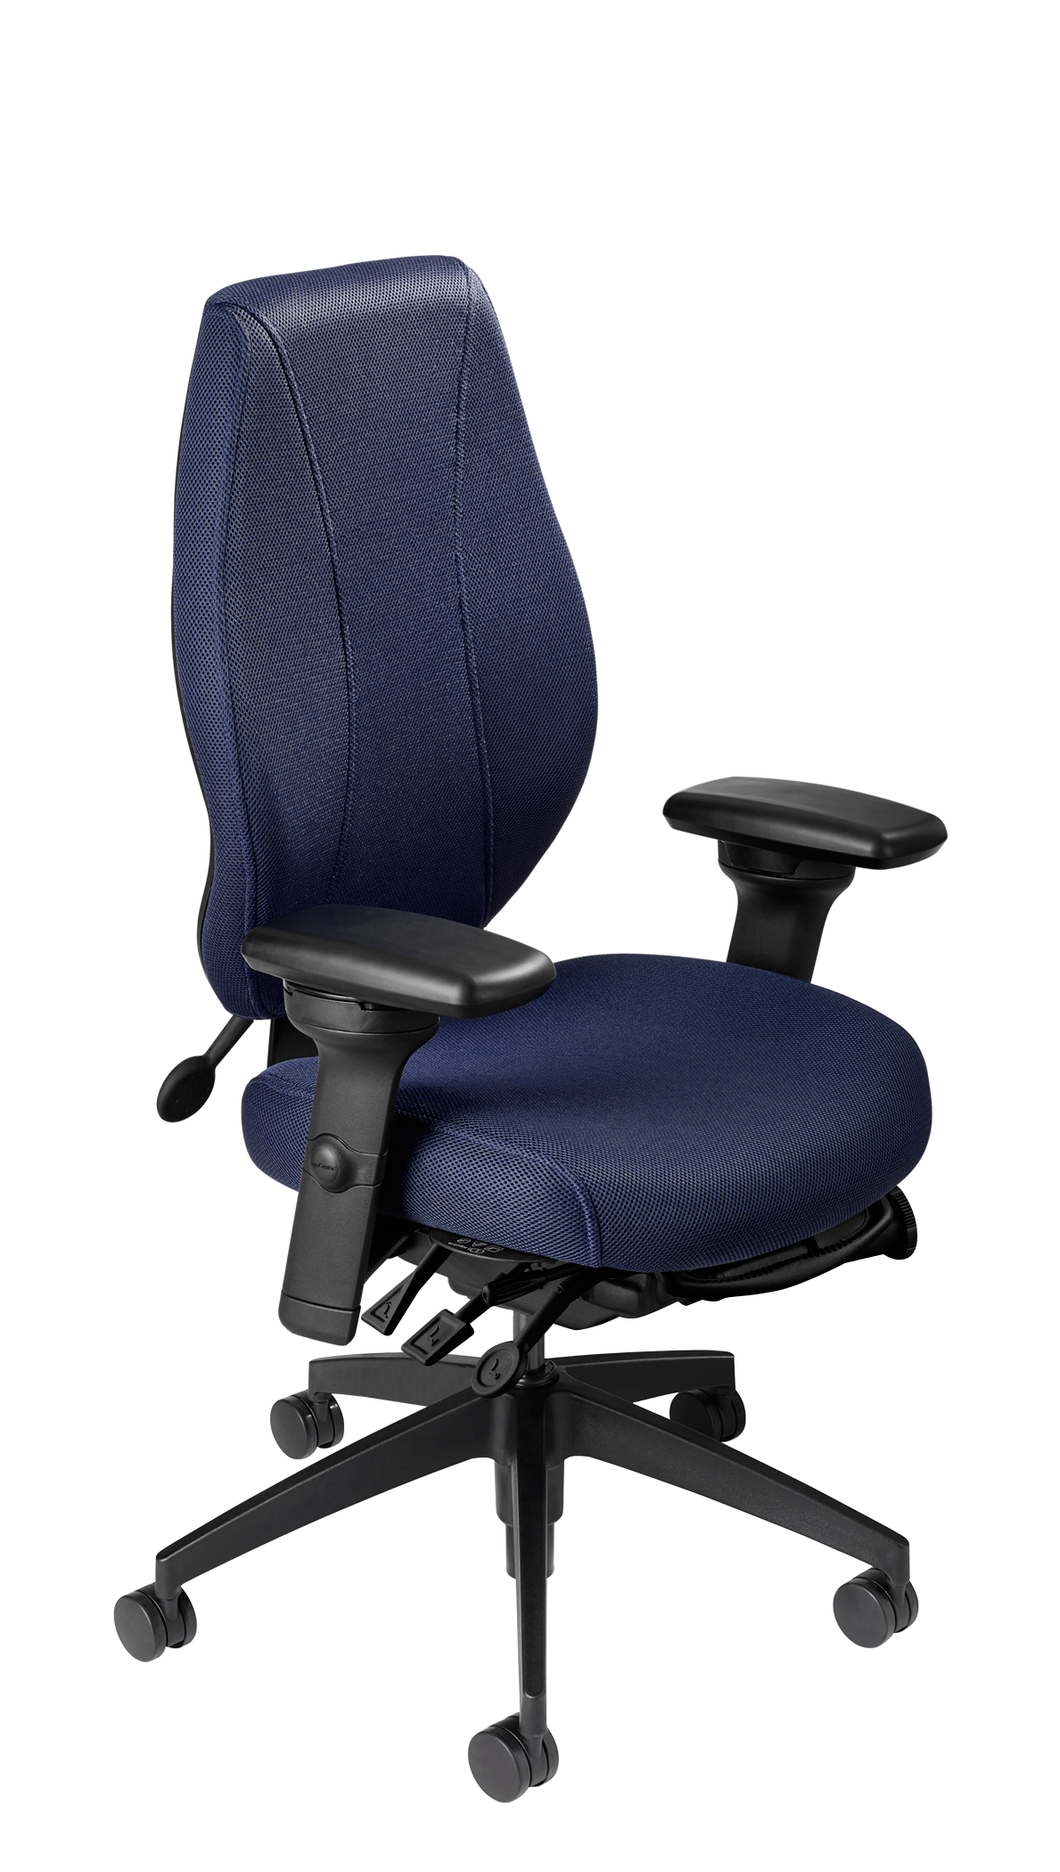 airCentric 2 with Multi Tilt Mechanism, Midnight Black Frame, AirKnit Navy Upholstery